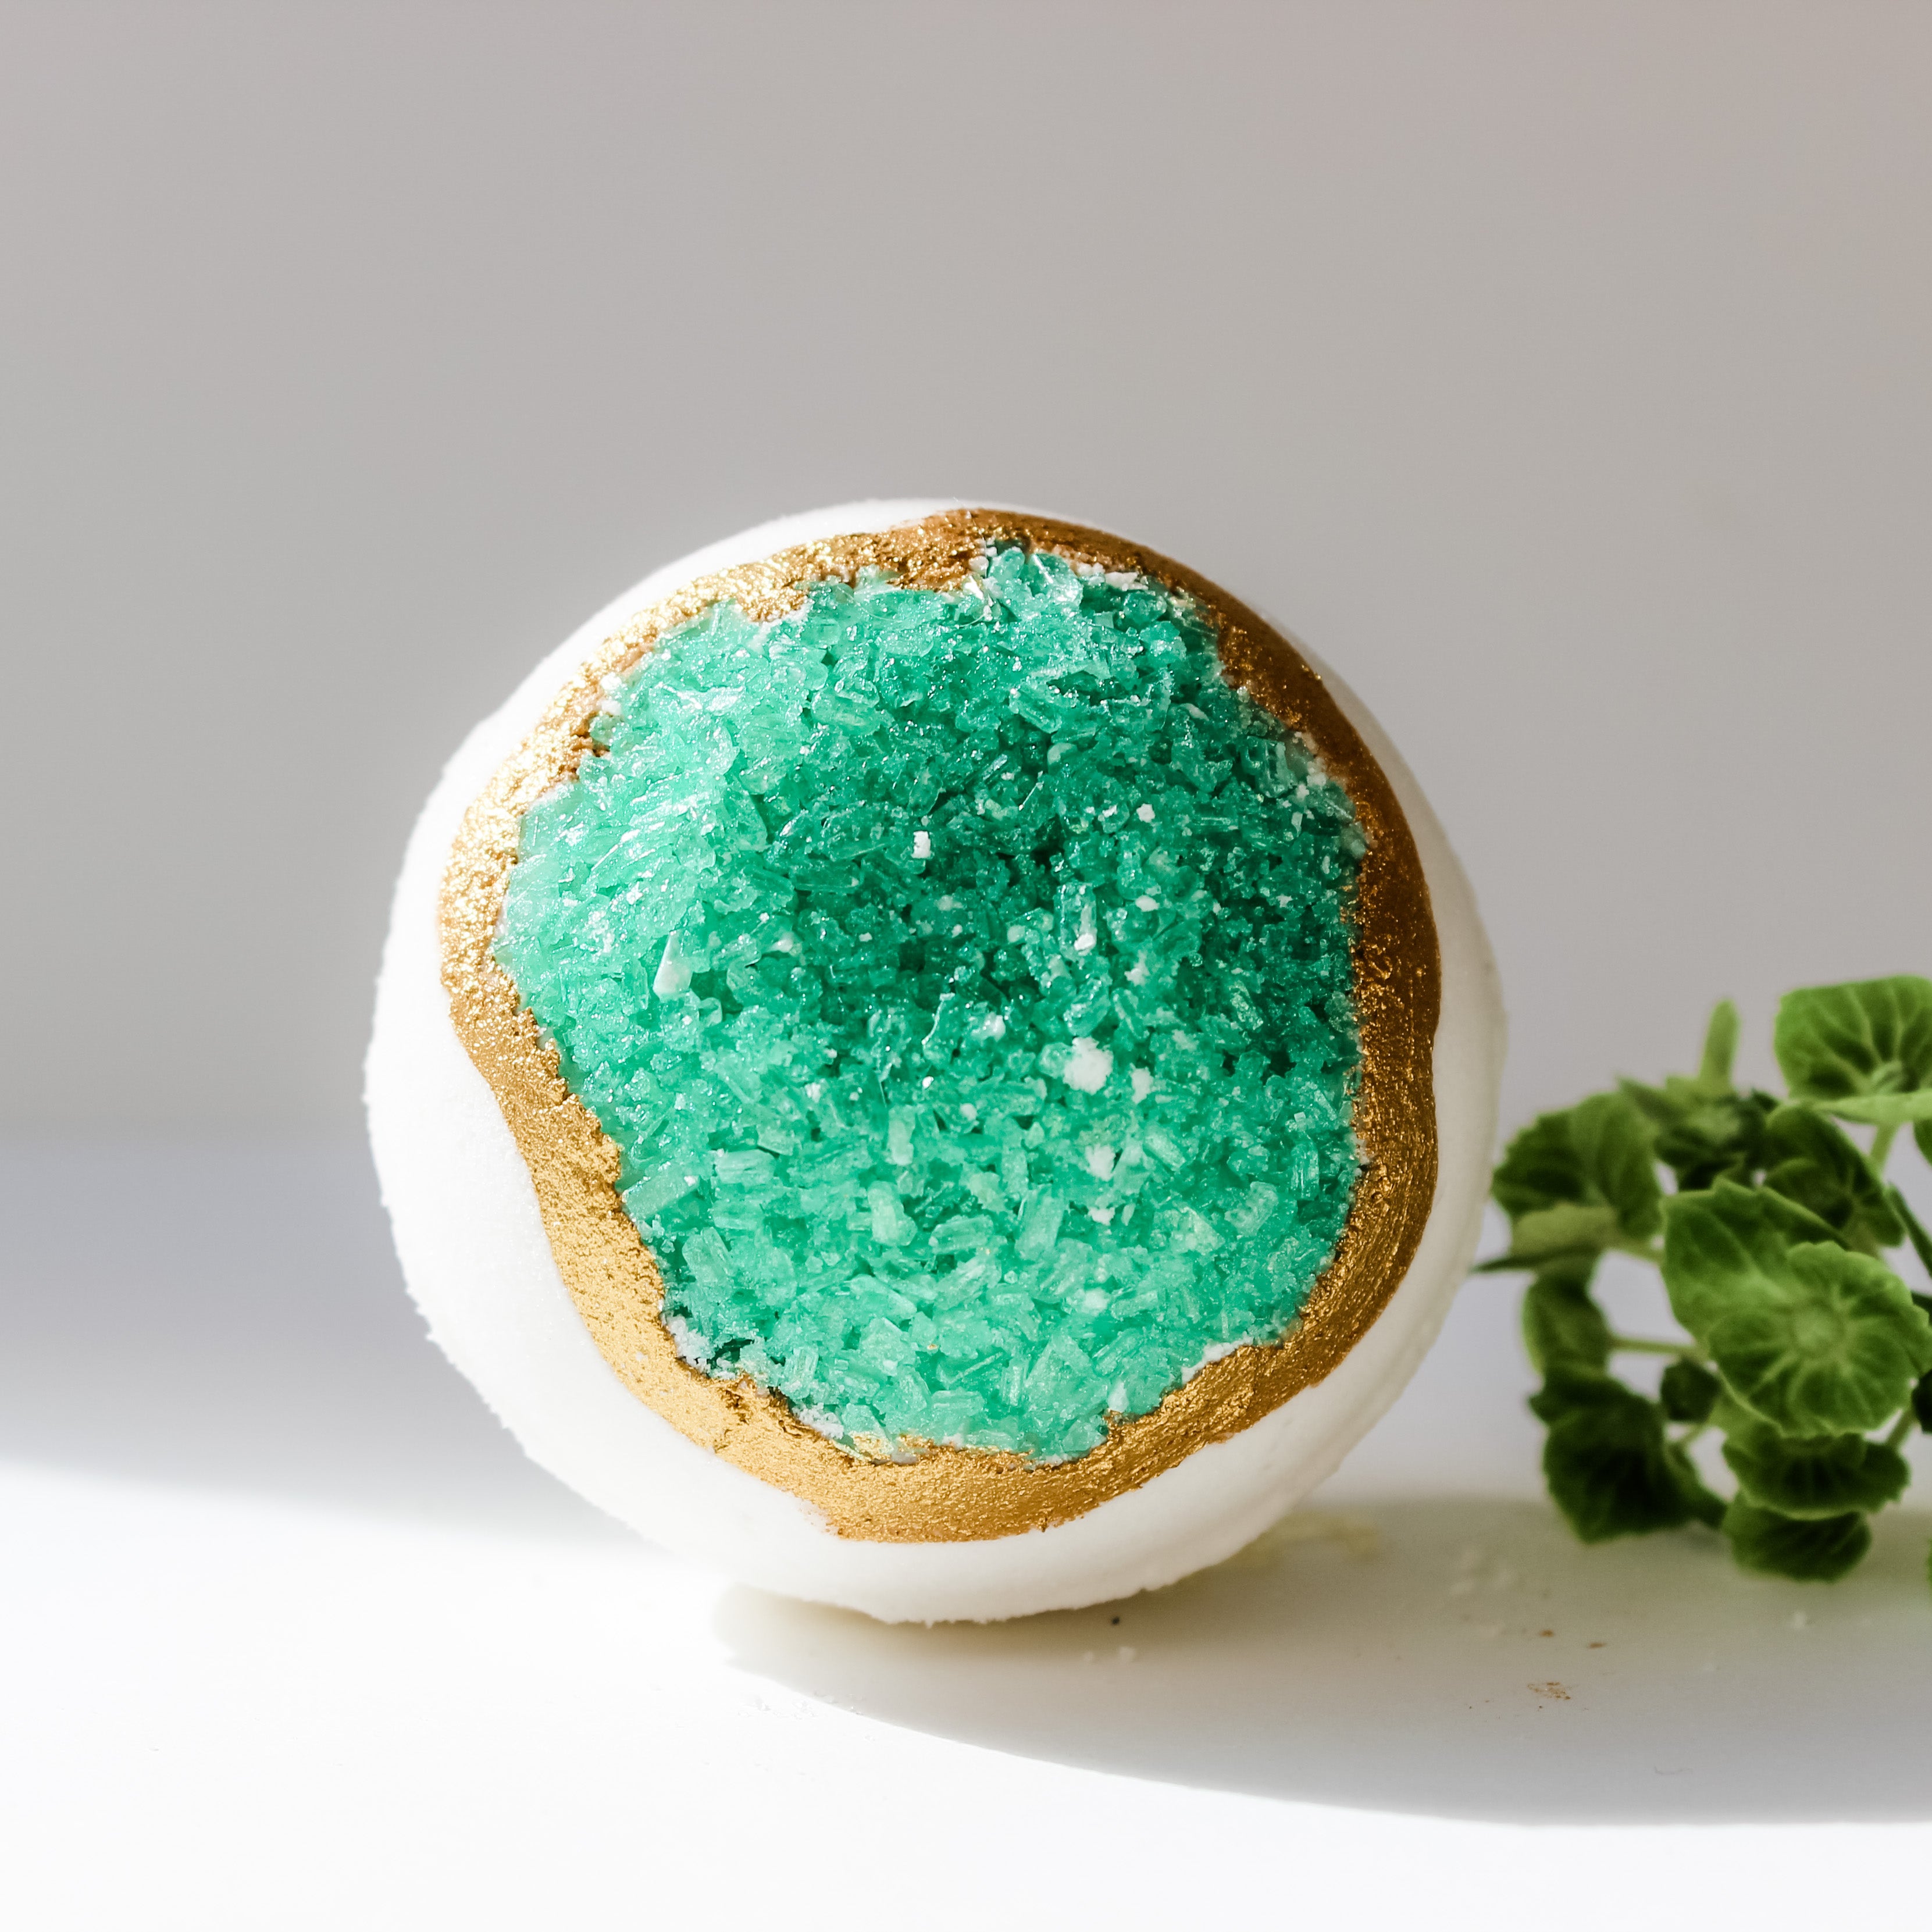 Emerald Empowerment Crystal Bath Bomb - Handmade with Natural Ingredients. Hidden Forest Naturals